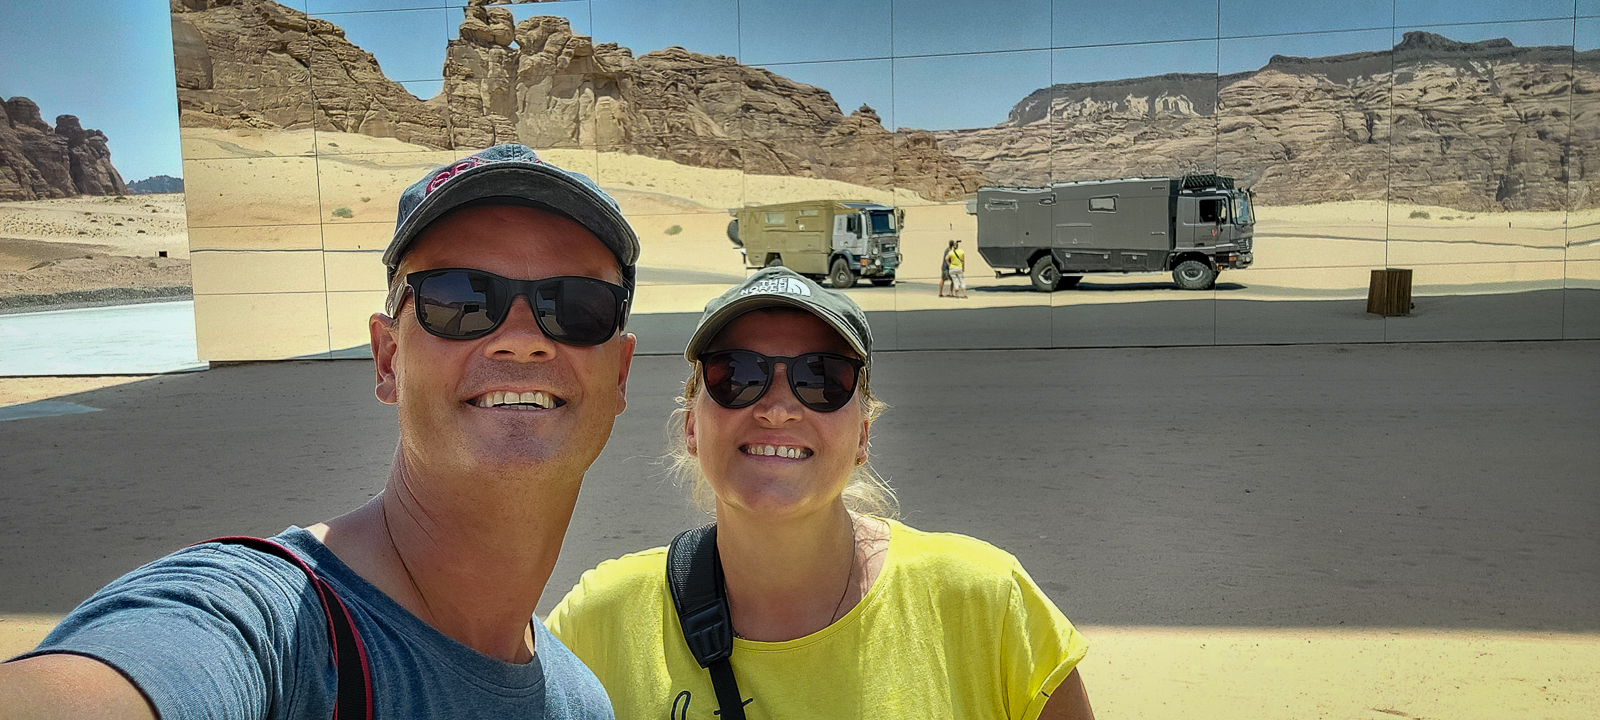 <span  class="uc_style_uc_tiles_grid_image_elementor_uc_items_attribute_title" style="color:#ffffff;">...of course we brought the trucks to take some nice pictures :-)</span>